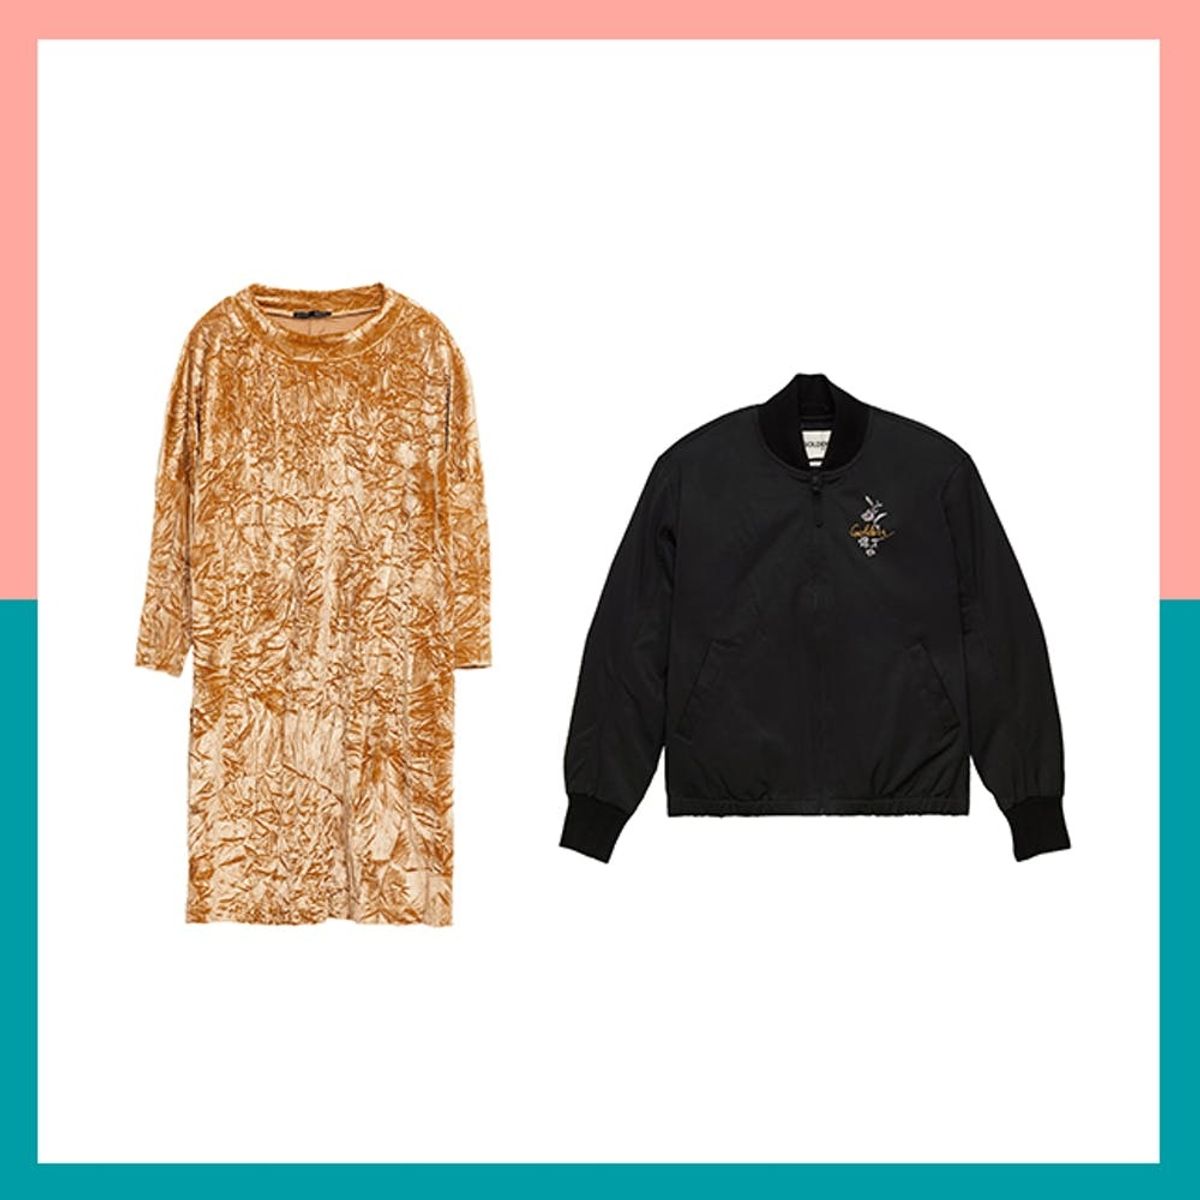 11 Party Dress and Coat Pairings That Will Stun All Season Long